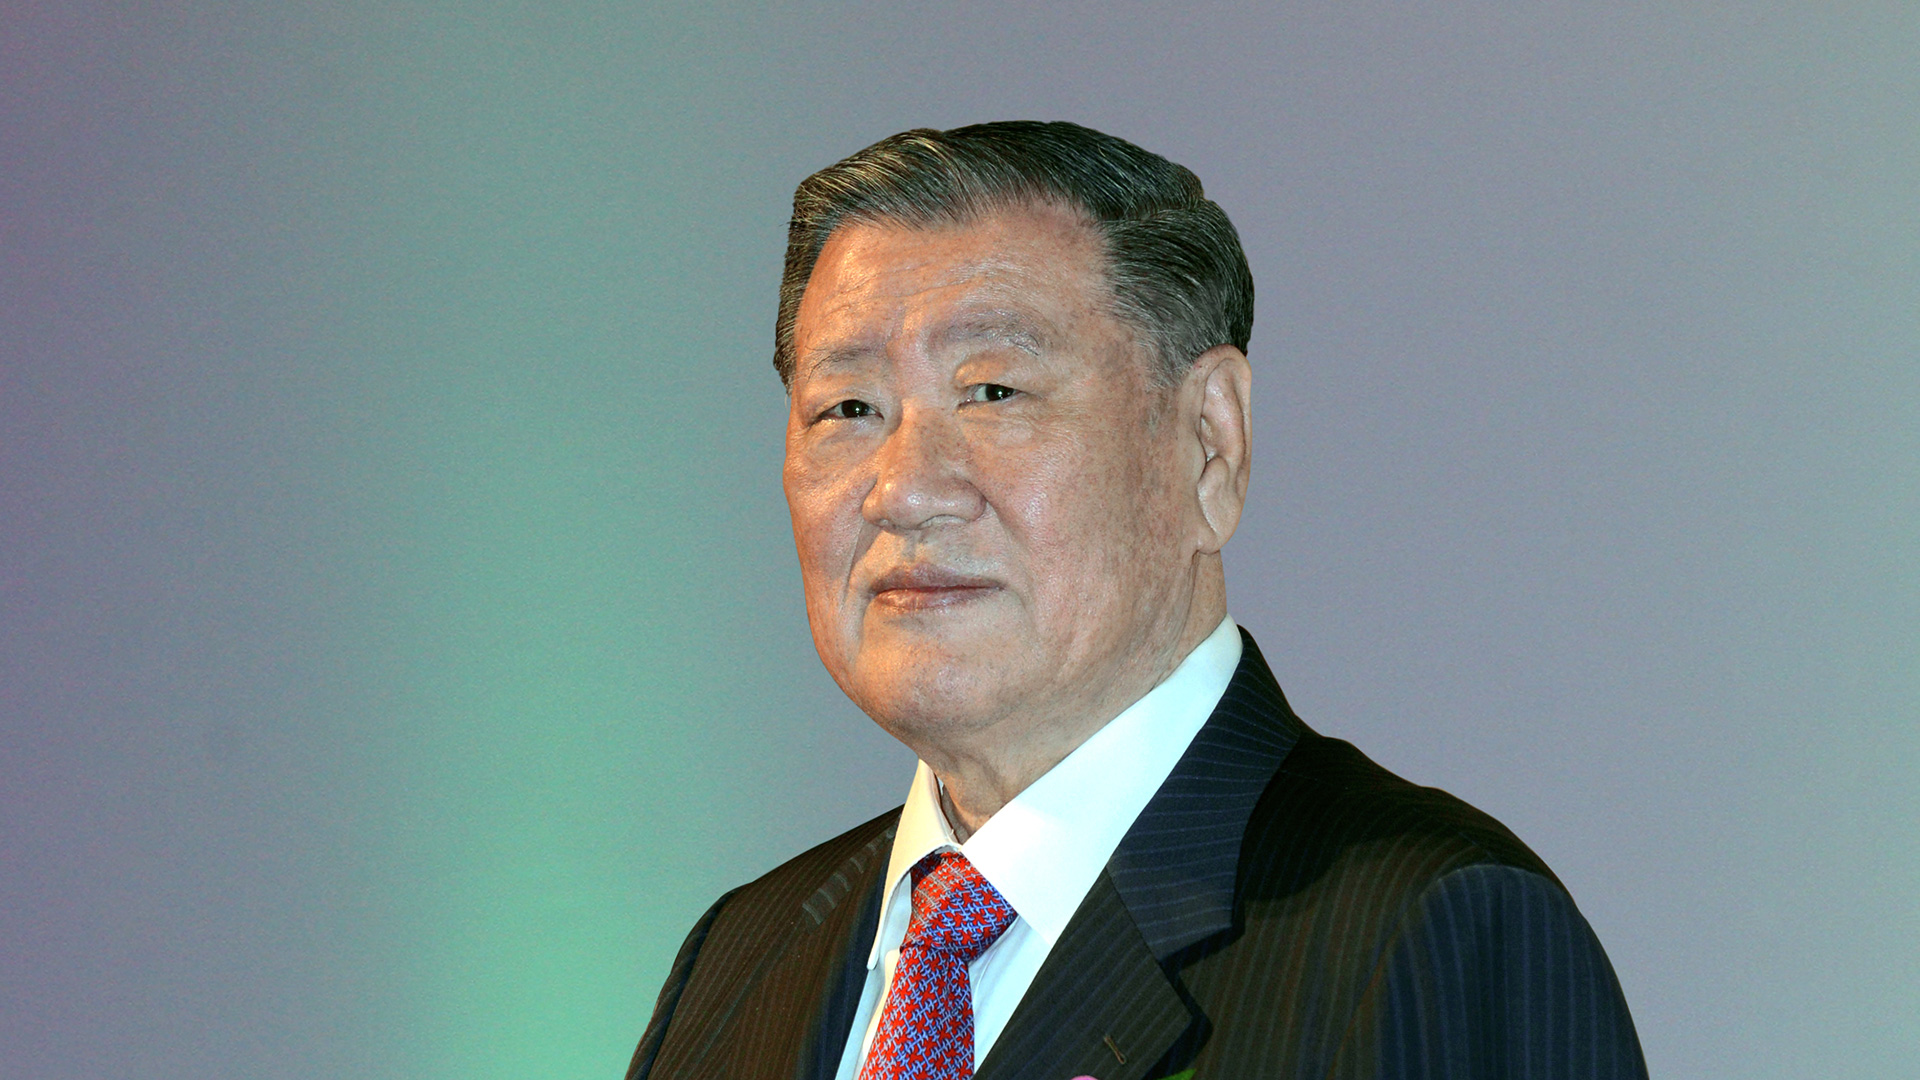 HMG Honorary Chairman Mong-Koo Chung Inducted Into Automotive Hall of Fame at Official Ceremony